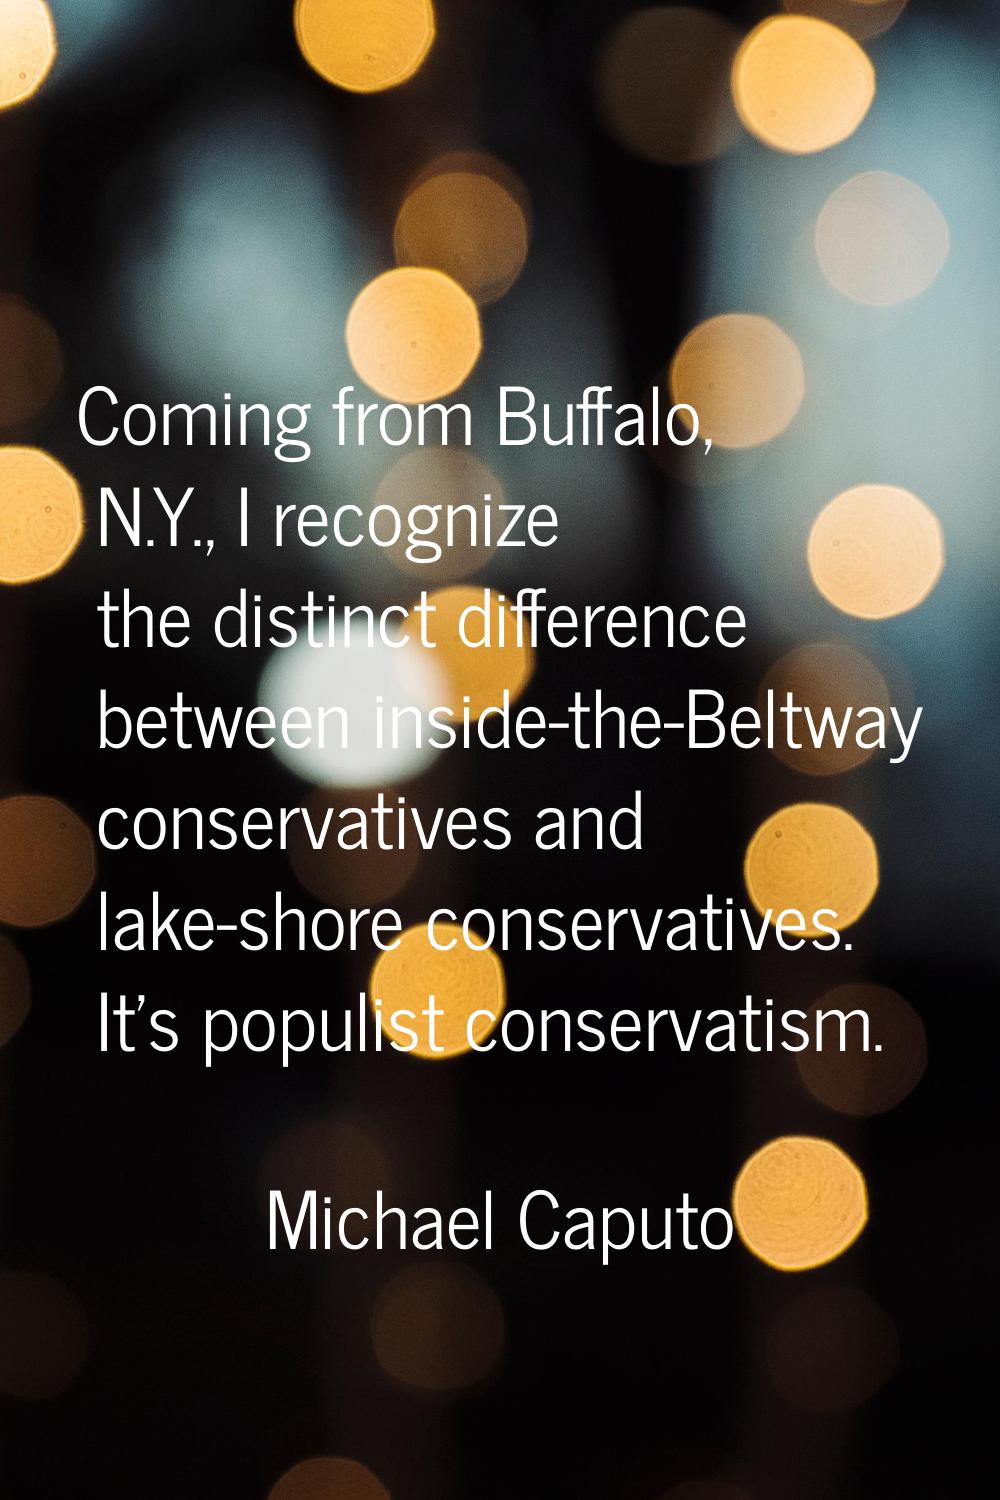 Coming from Buffalo, N.Y., I recognize the distinct difference between inside-the-Beltway conservat